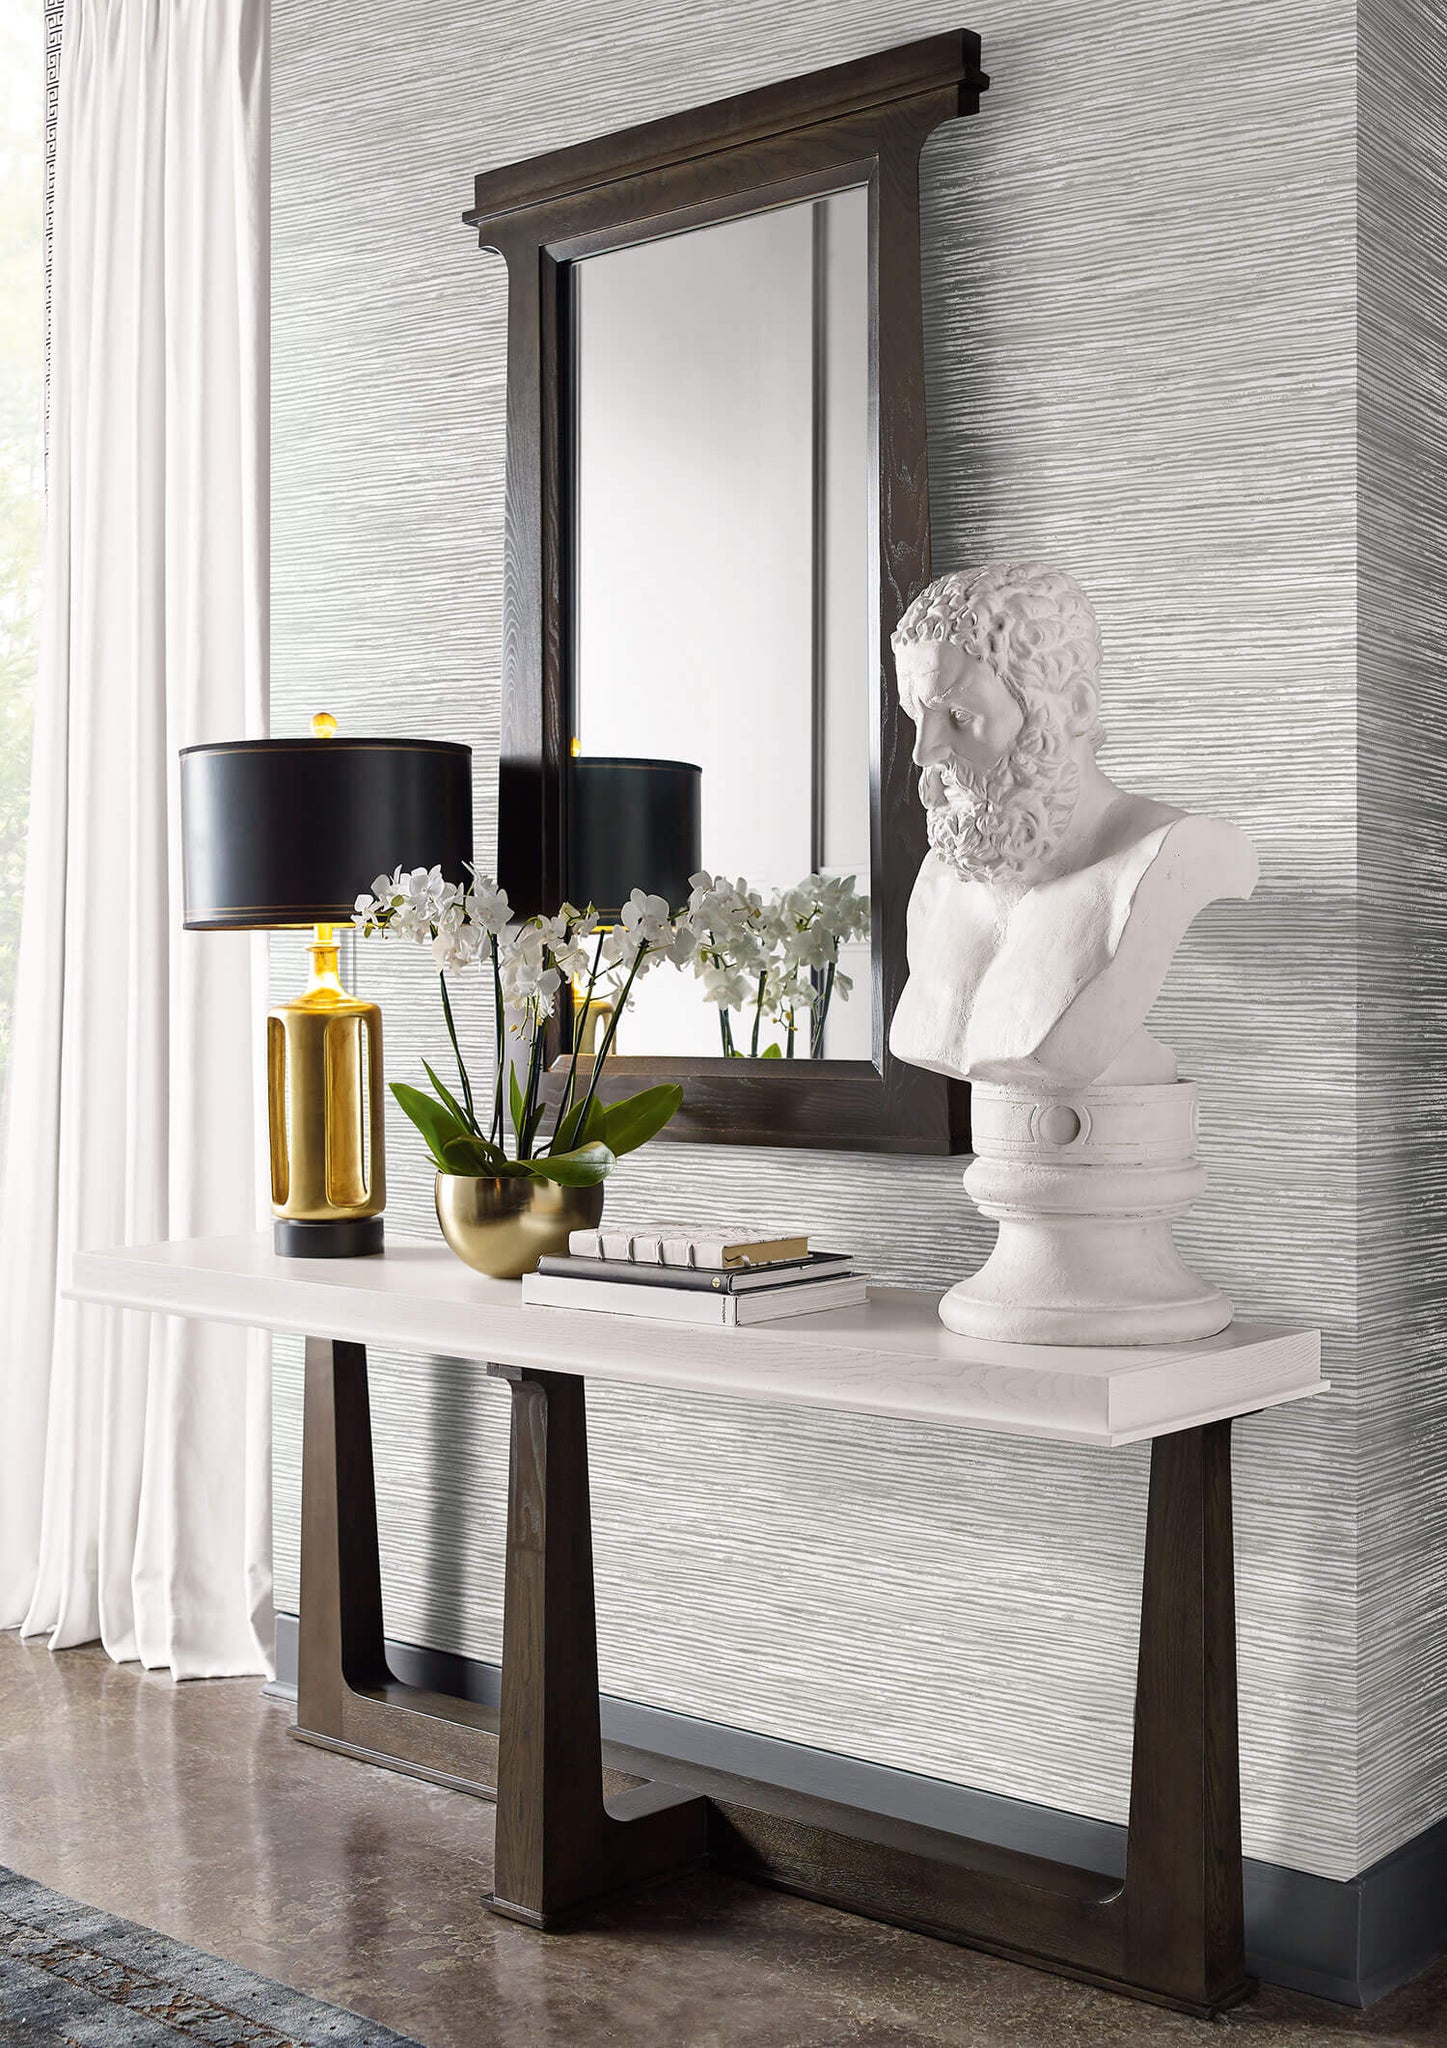 Osprey Faux Grasscloth Wallpaper In Cove Grey And Silver From The Luxe Burke Decor